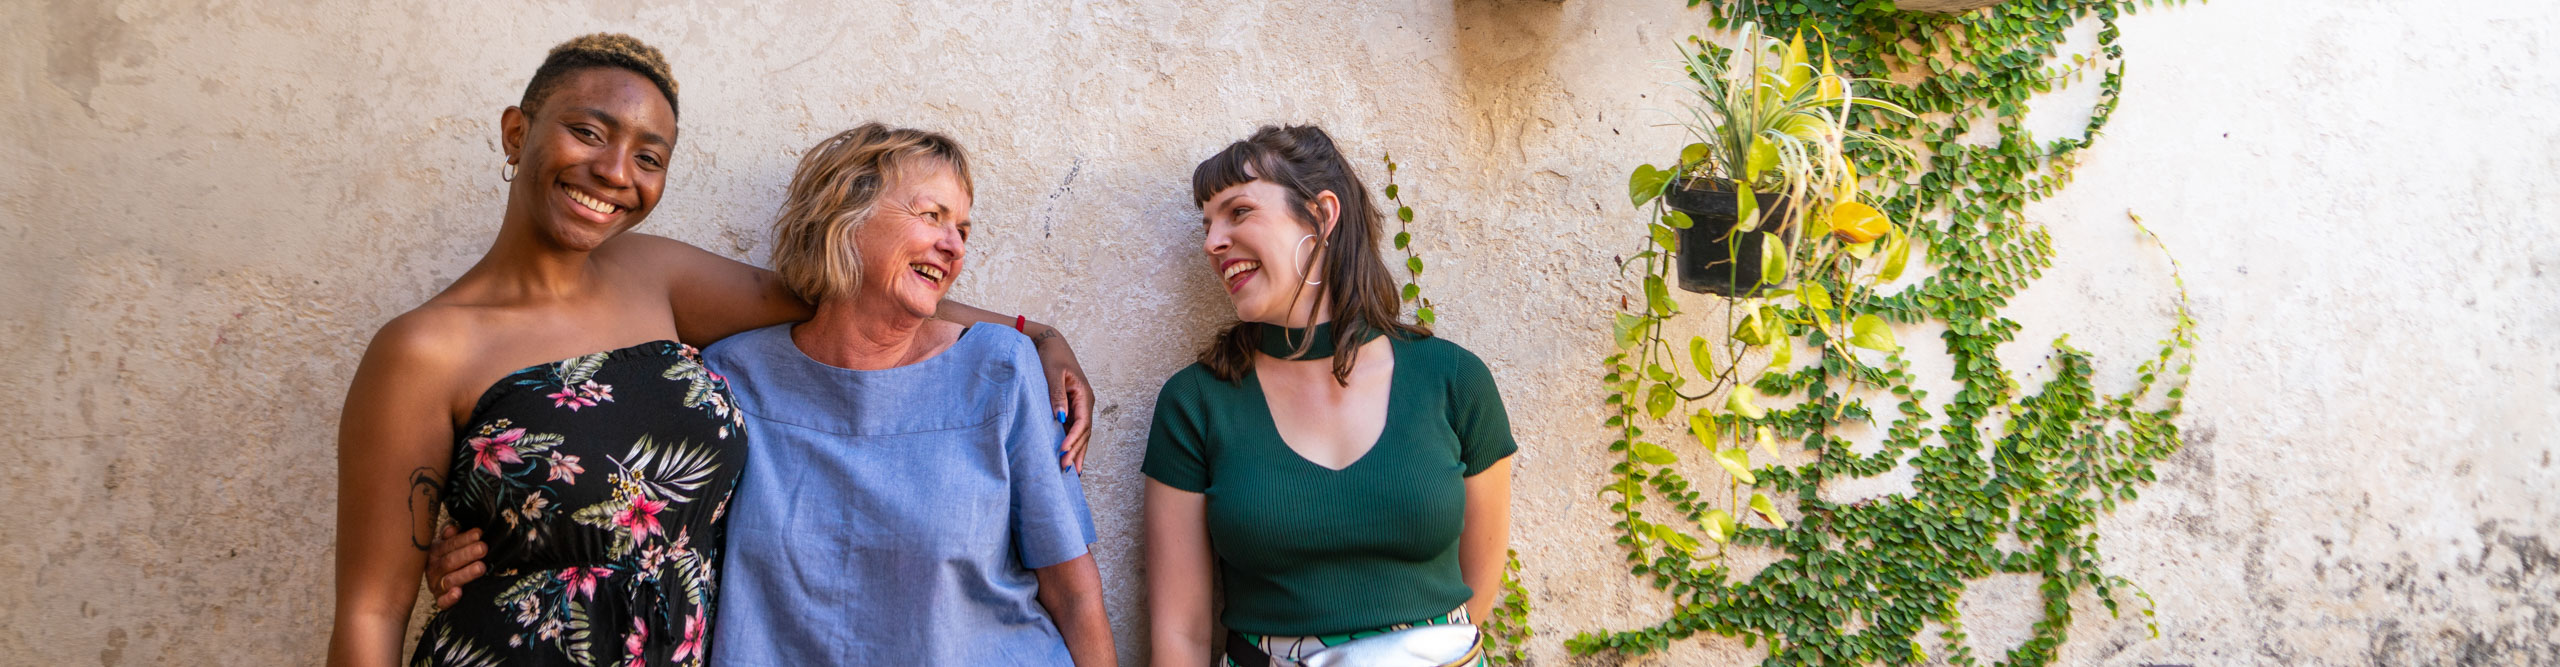 Women smiling and laughing and leaning against a wall in the sun in Mexico 